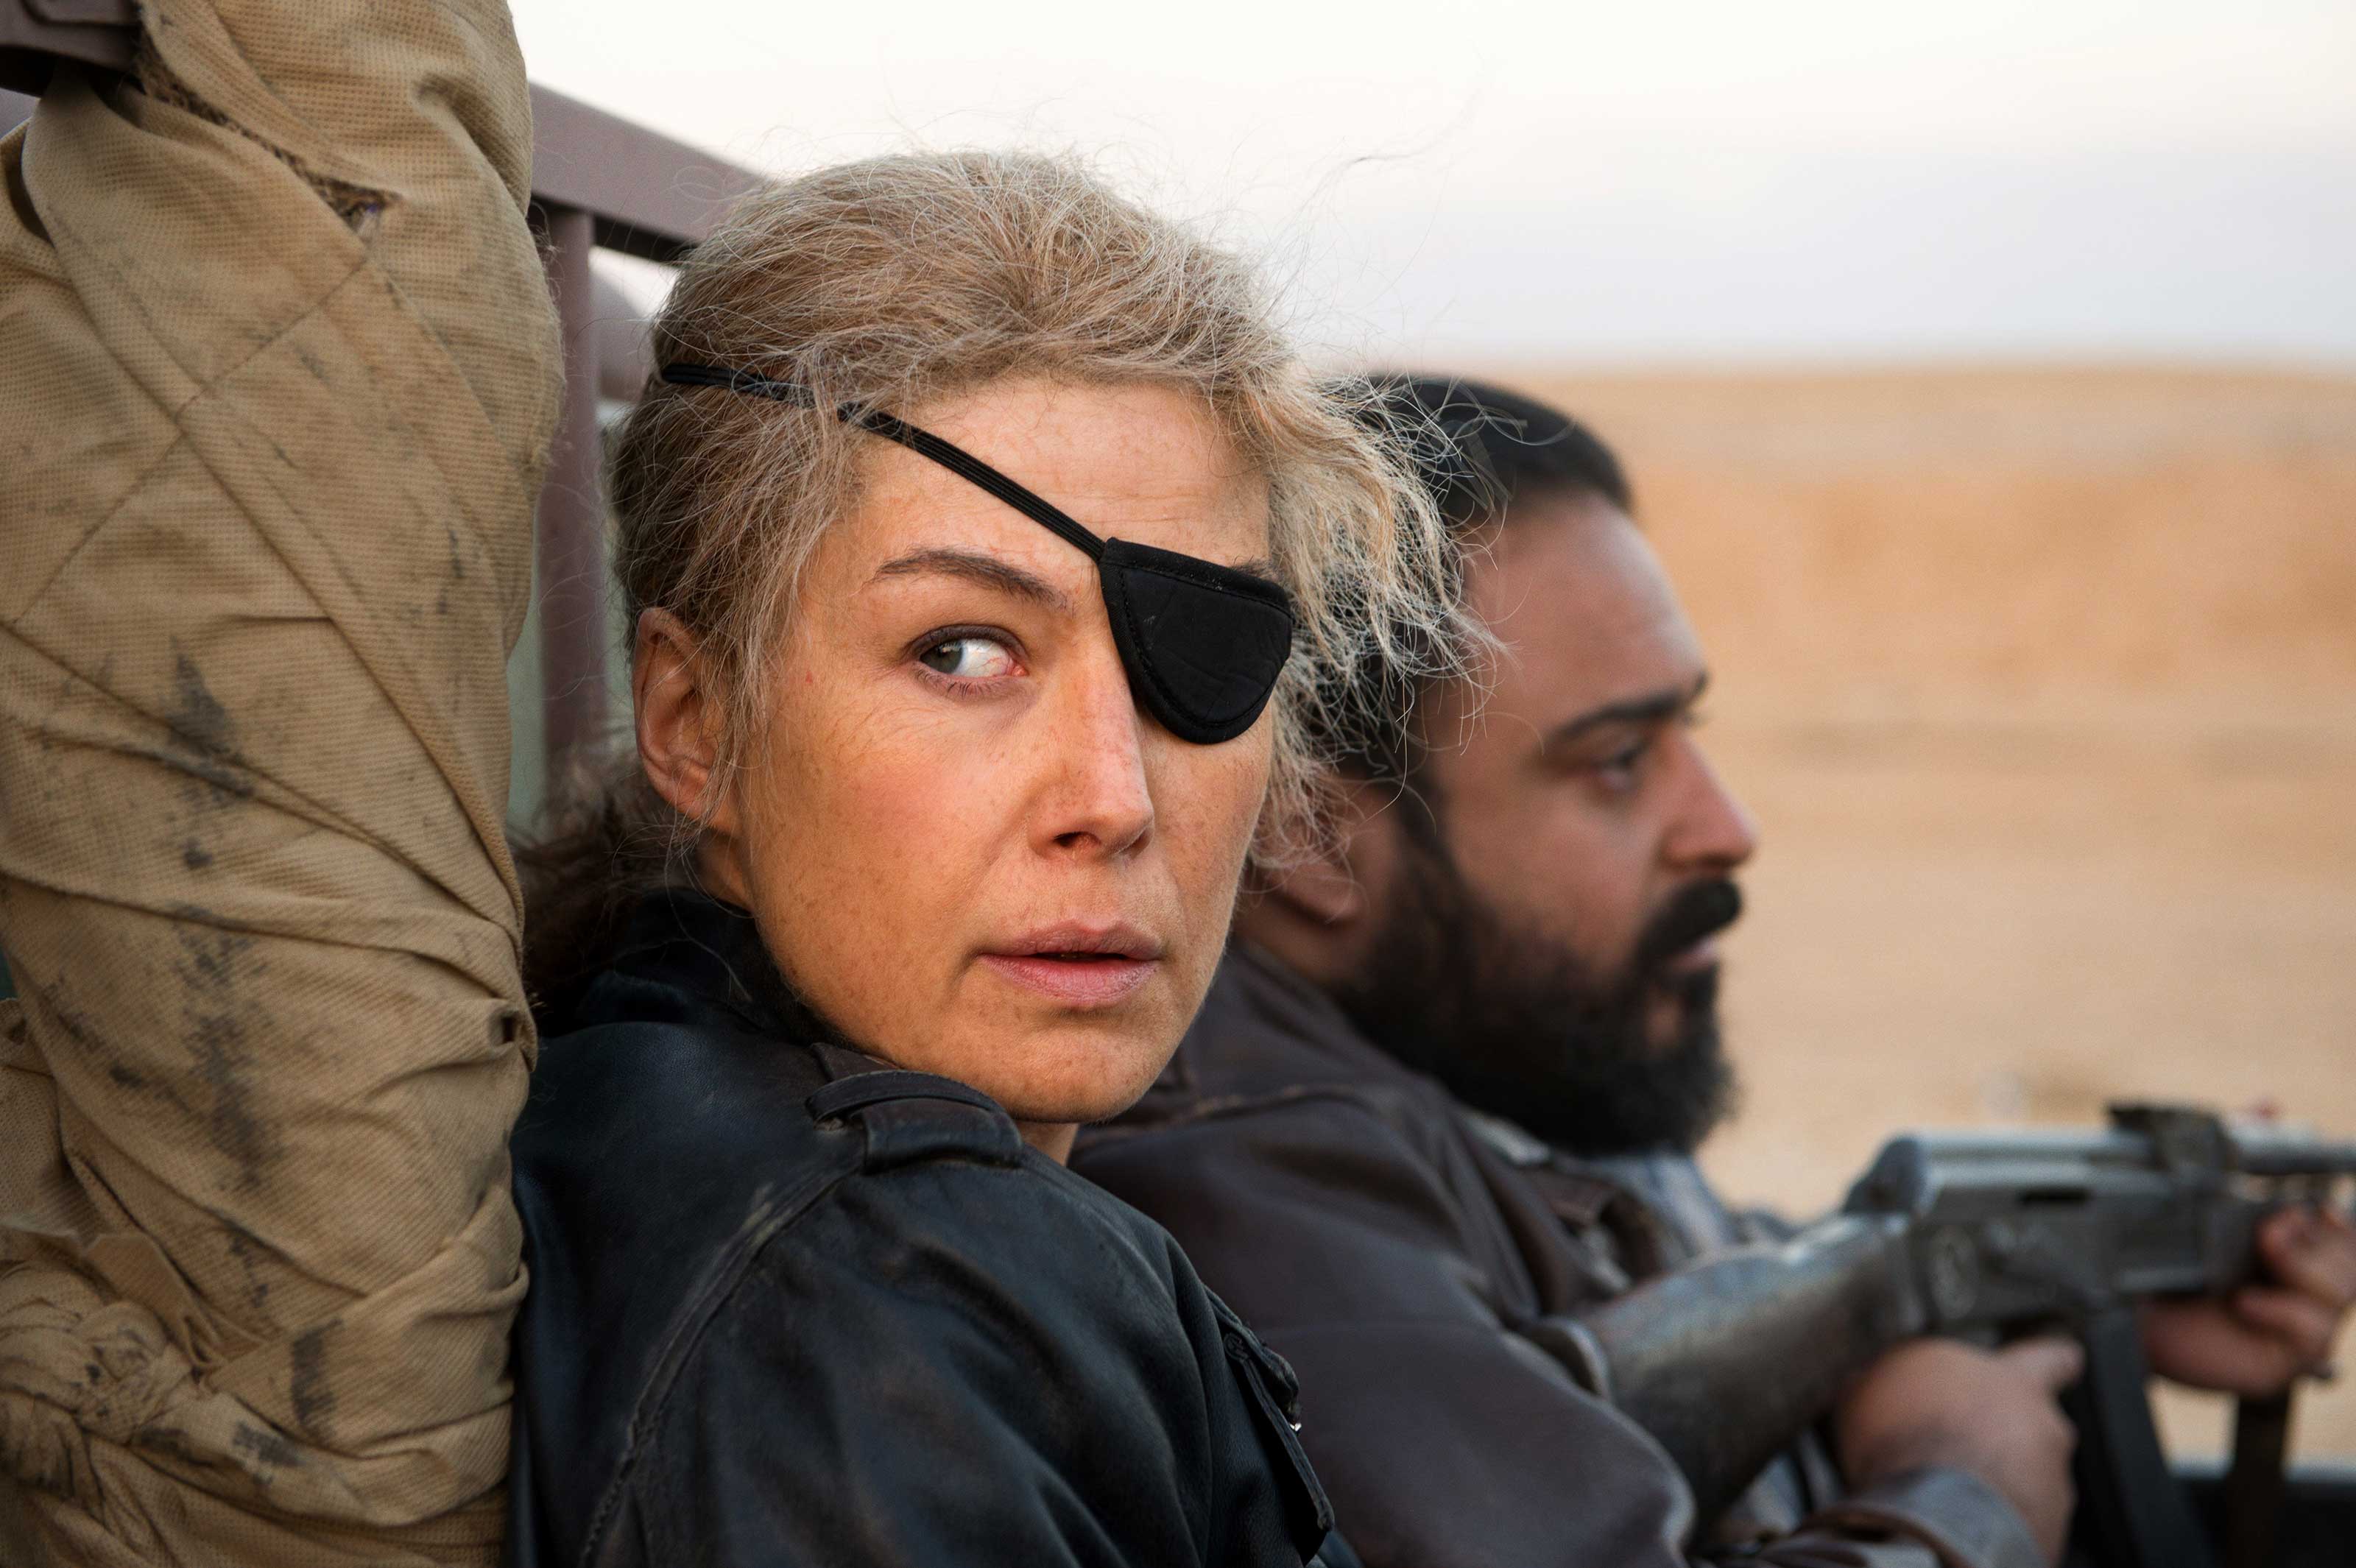 Rosamund Pike as war journalist Marie Colvin in "A Private War". (Aviron Pictures)